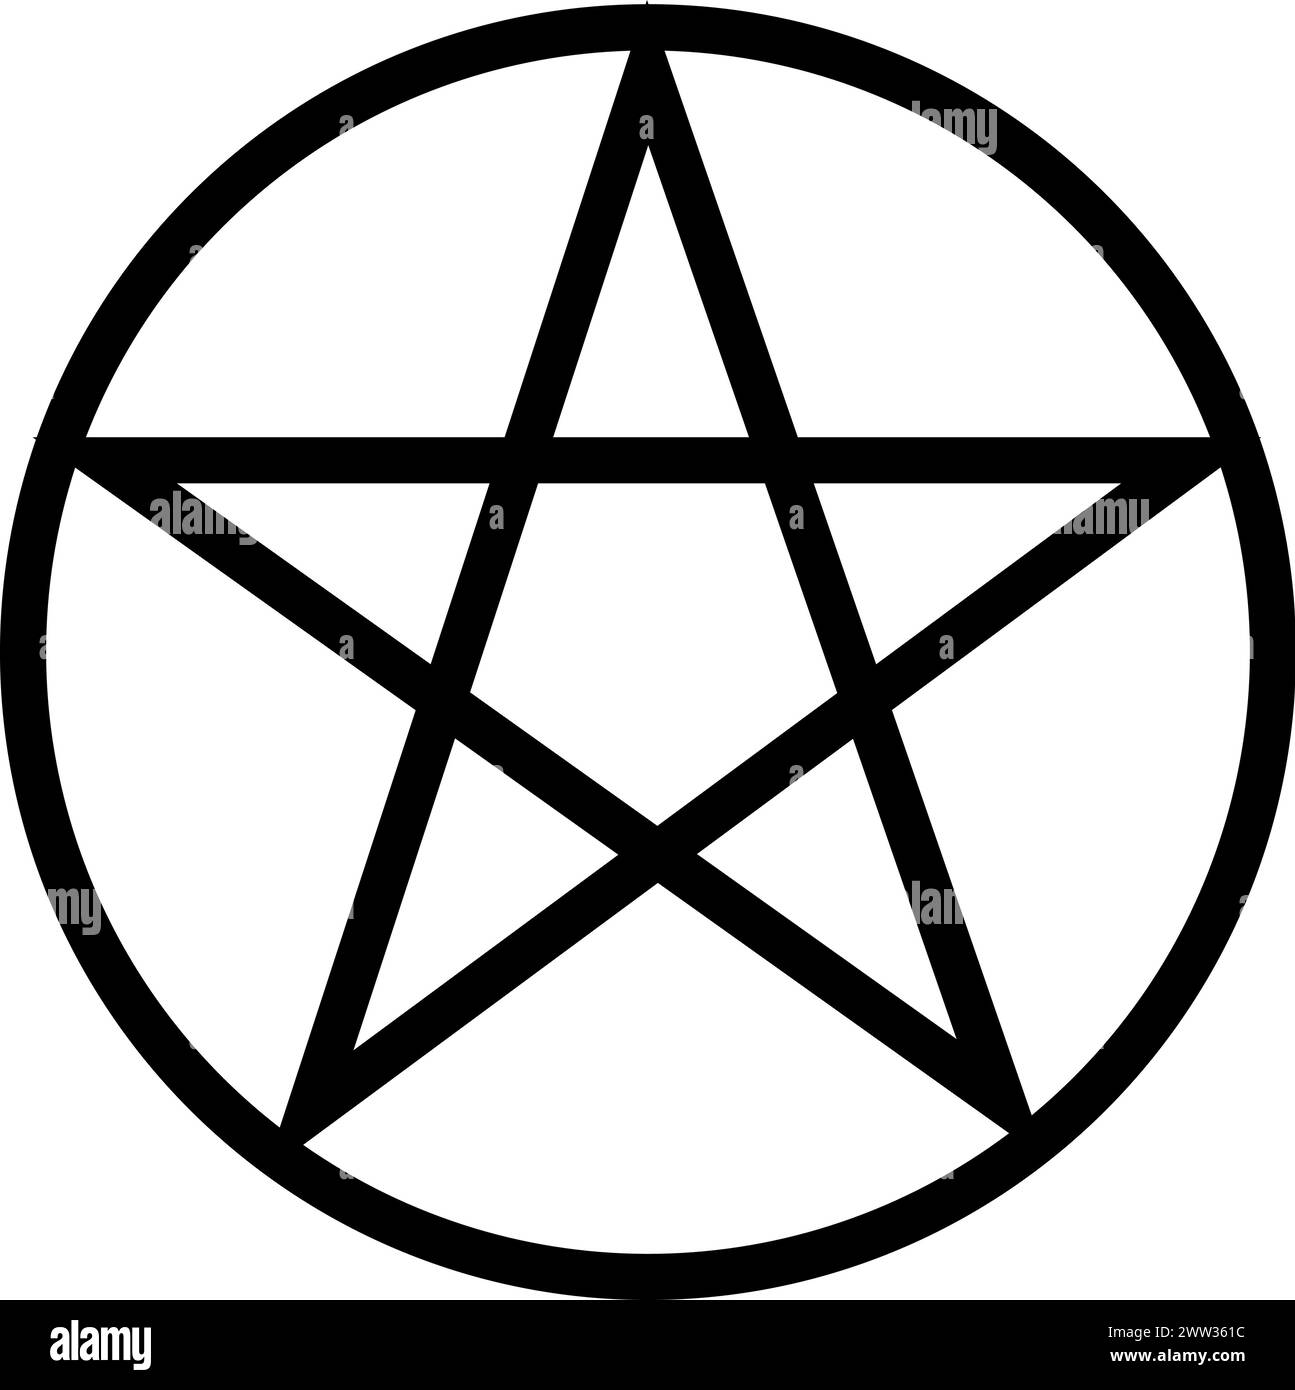 Star pentagram mystical religious symbol. Spiritual occult sign of traditional culture of worship and veneration. Simple black and white vector isolat Stock Vector